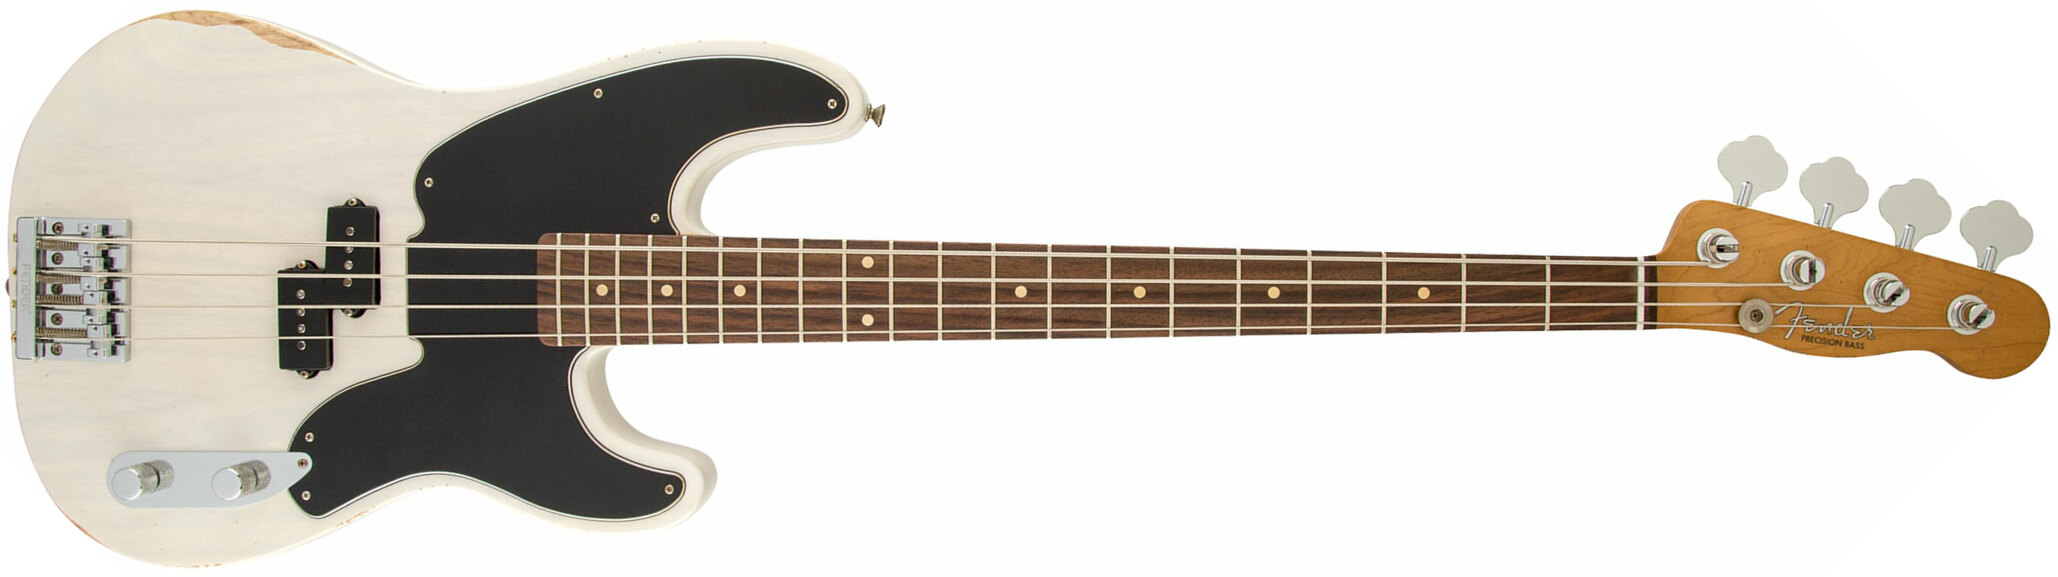 Fender Mike Dirnt Precision Bass Mex Signature Rw - White Blonde - Solid body electric bass - Main picture